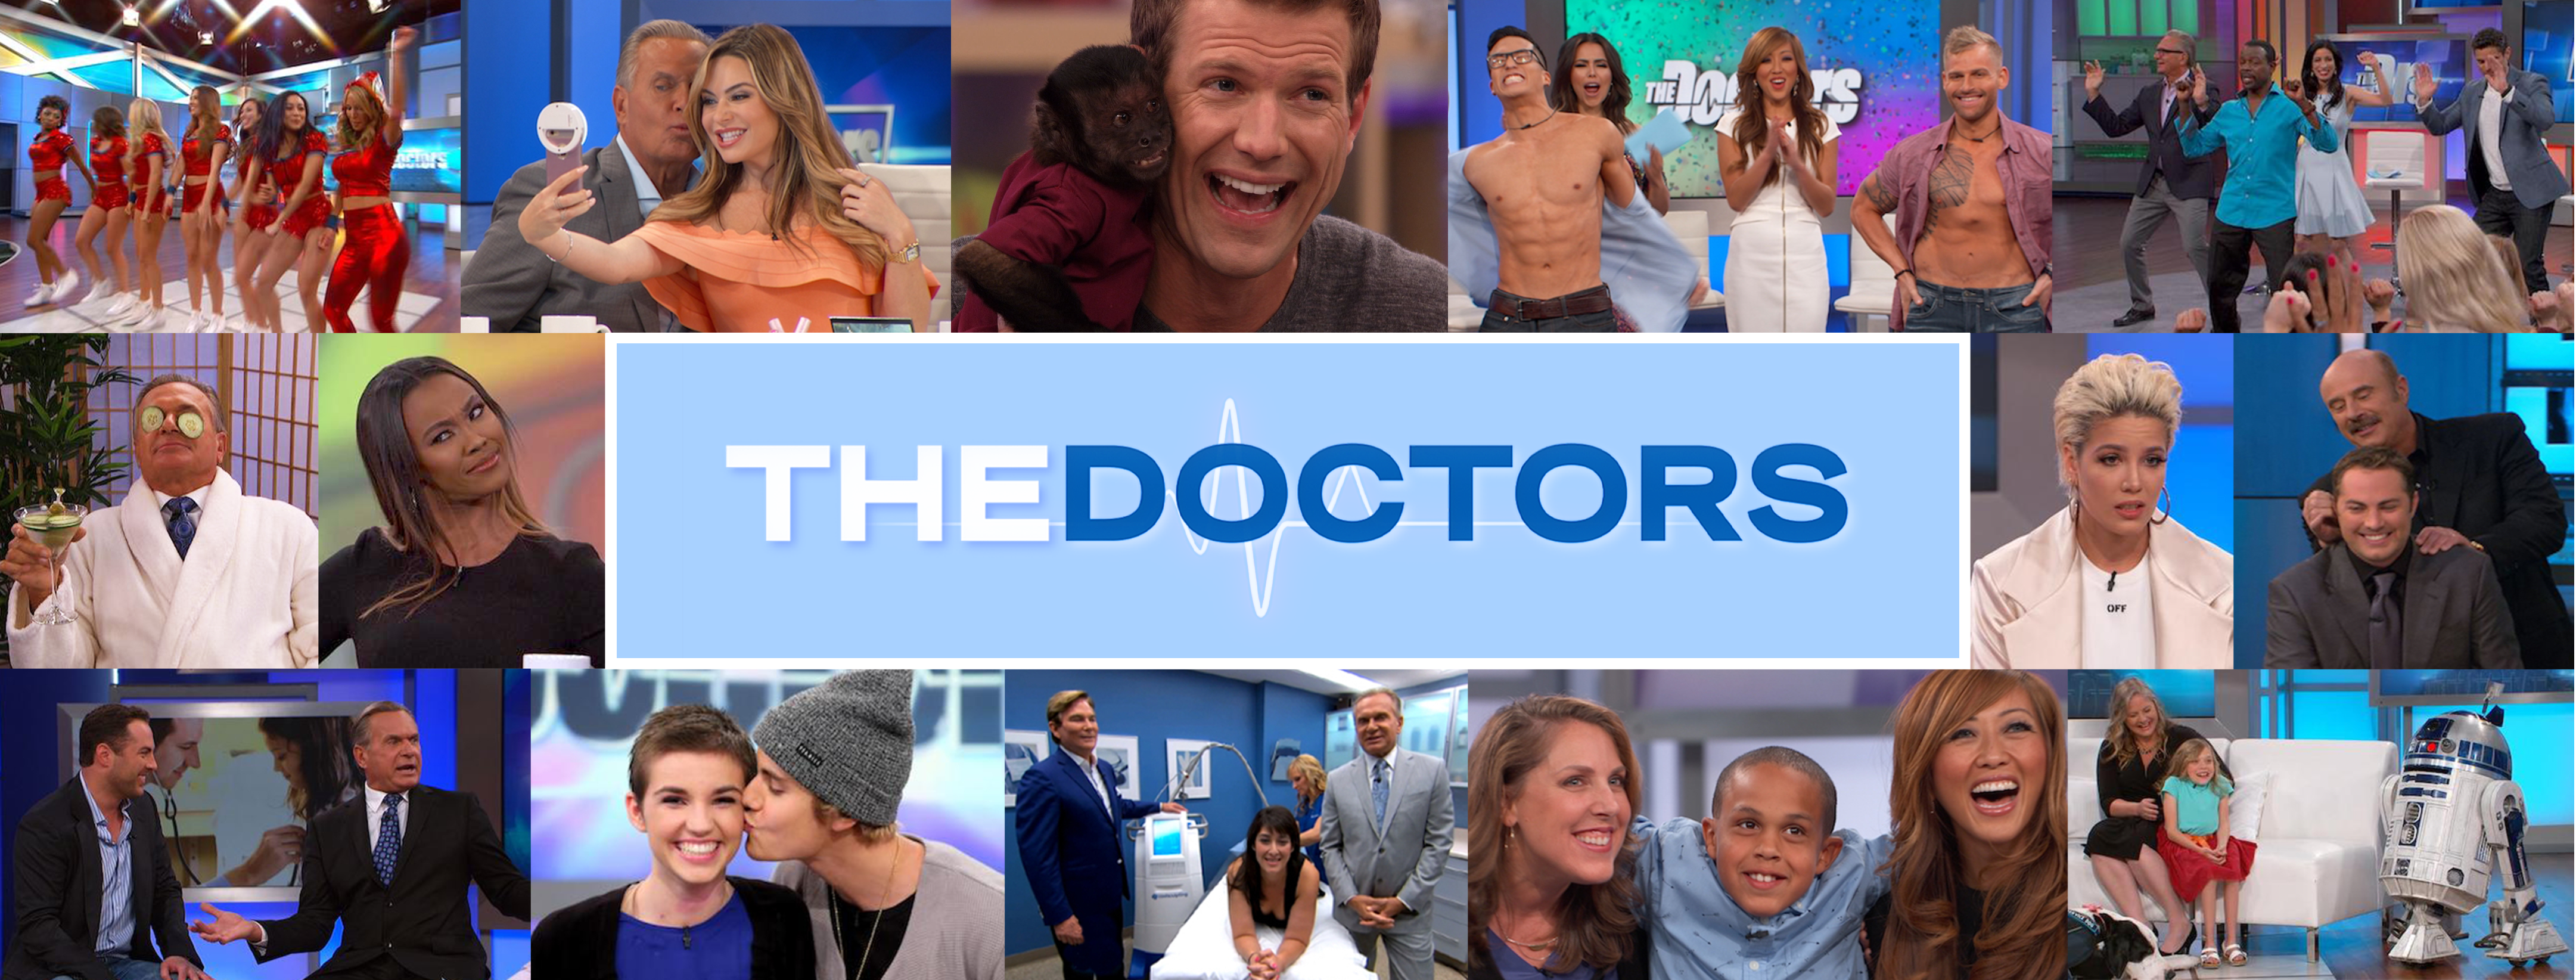 Dr. Travis Comes Clean about a Health Issue | The Doctors ...